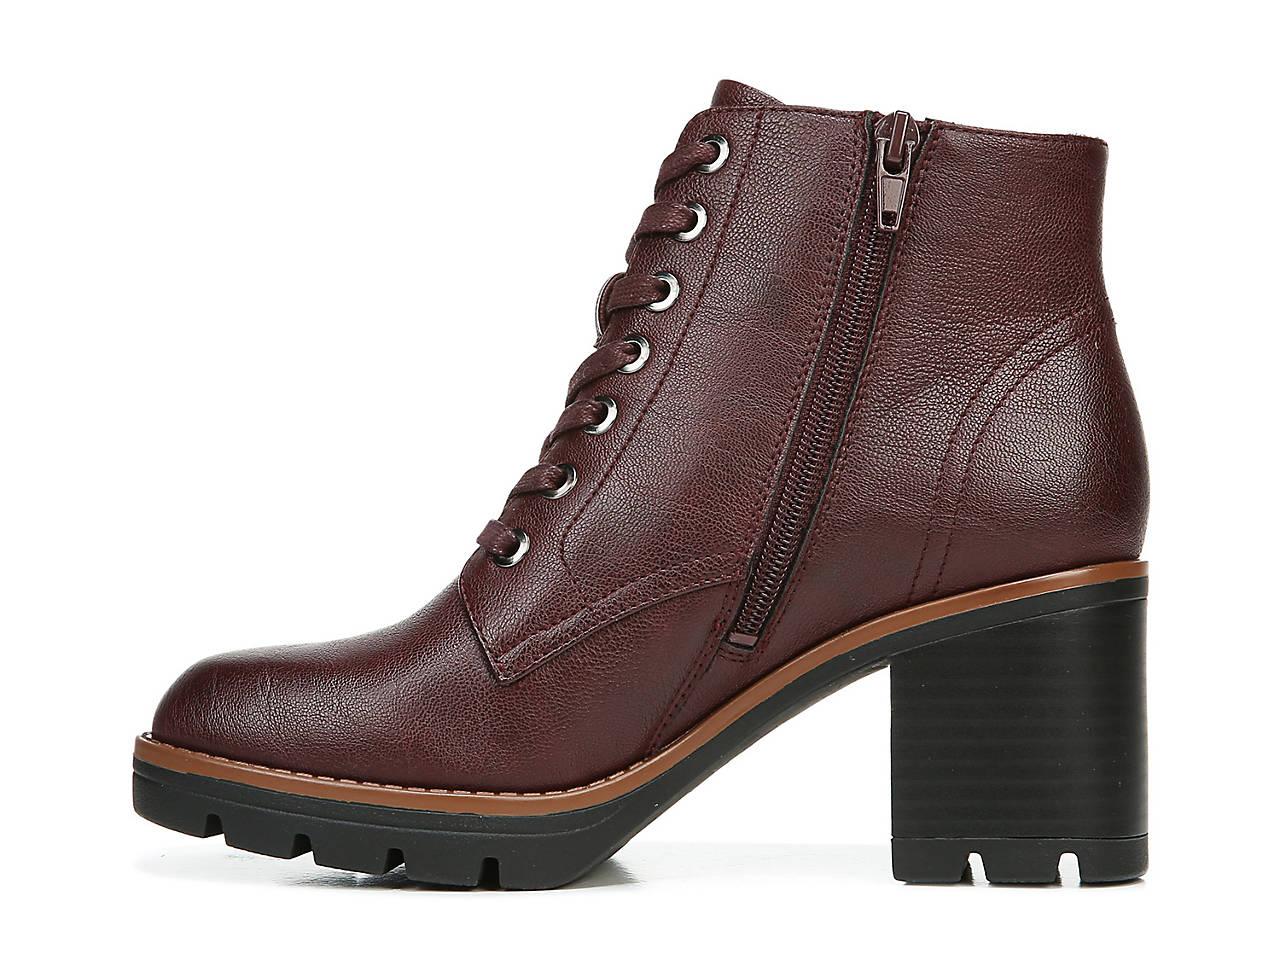 Naturalizer Synthetic Madalynn Combat Boot in Burgundy (Brown) - Lyst